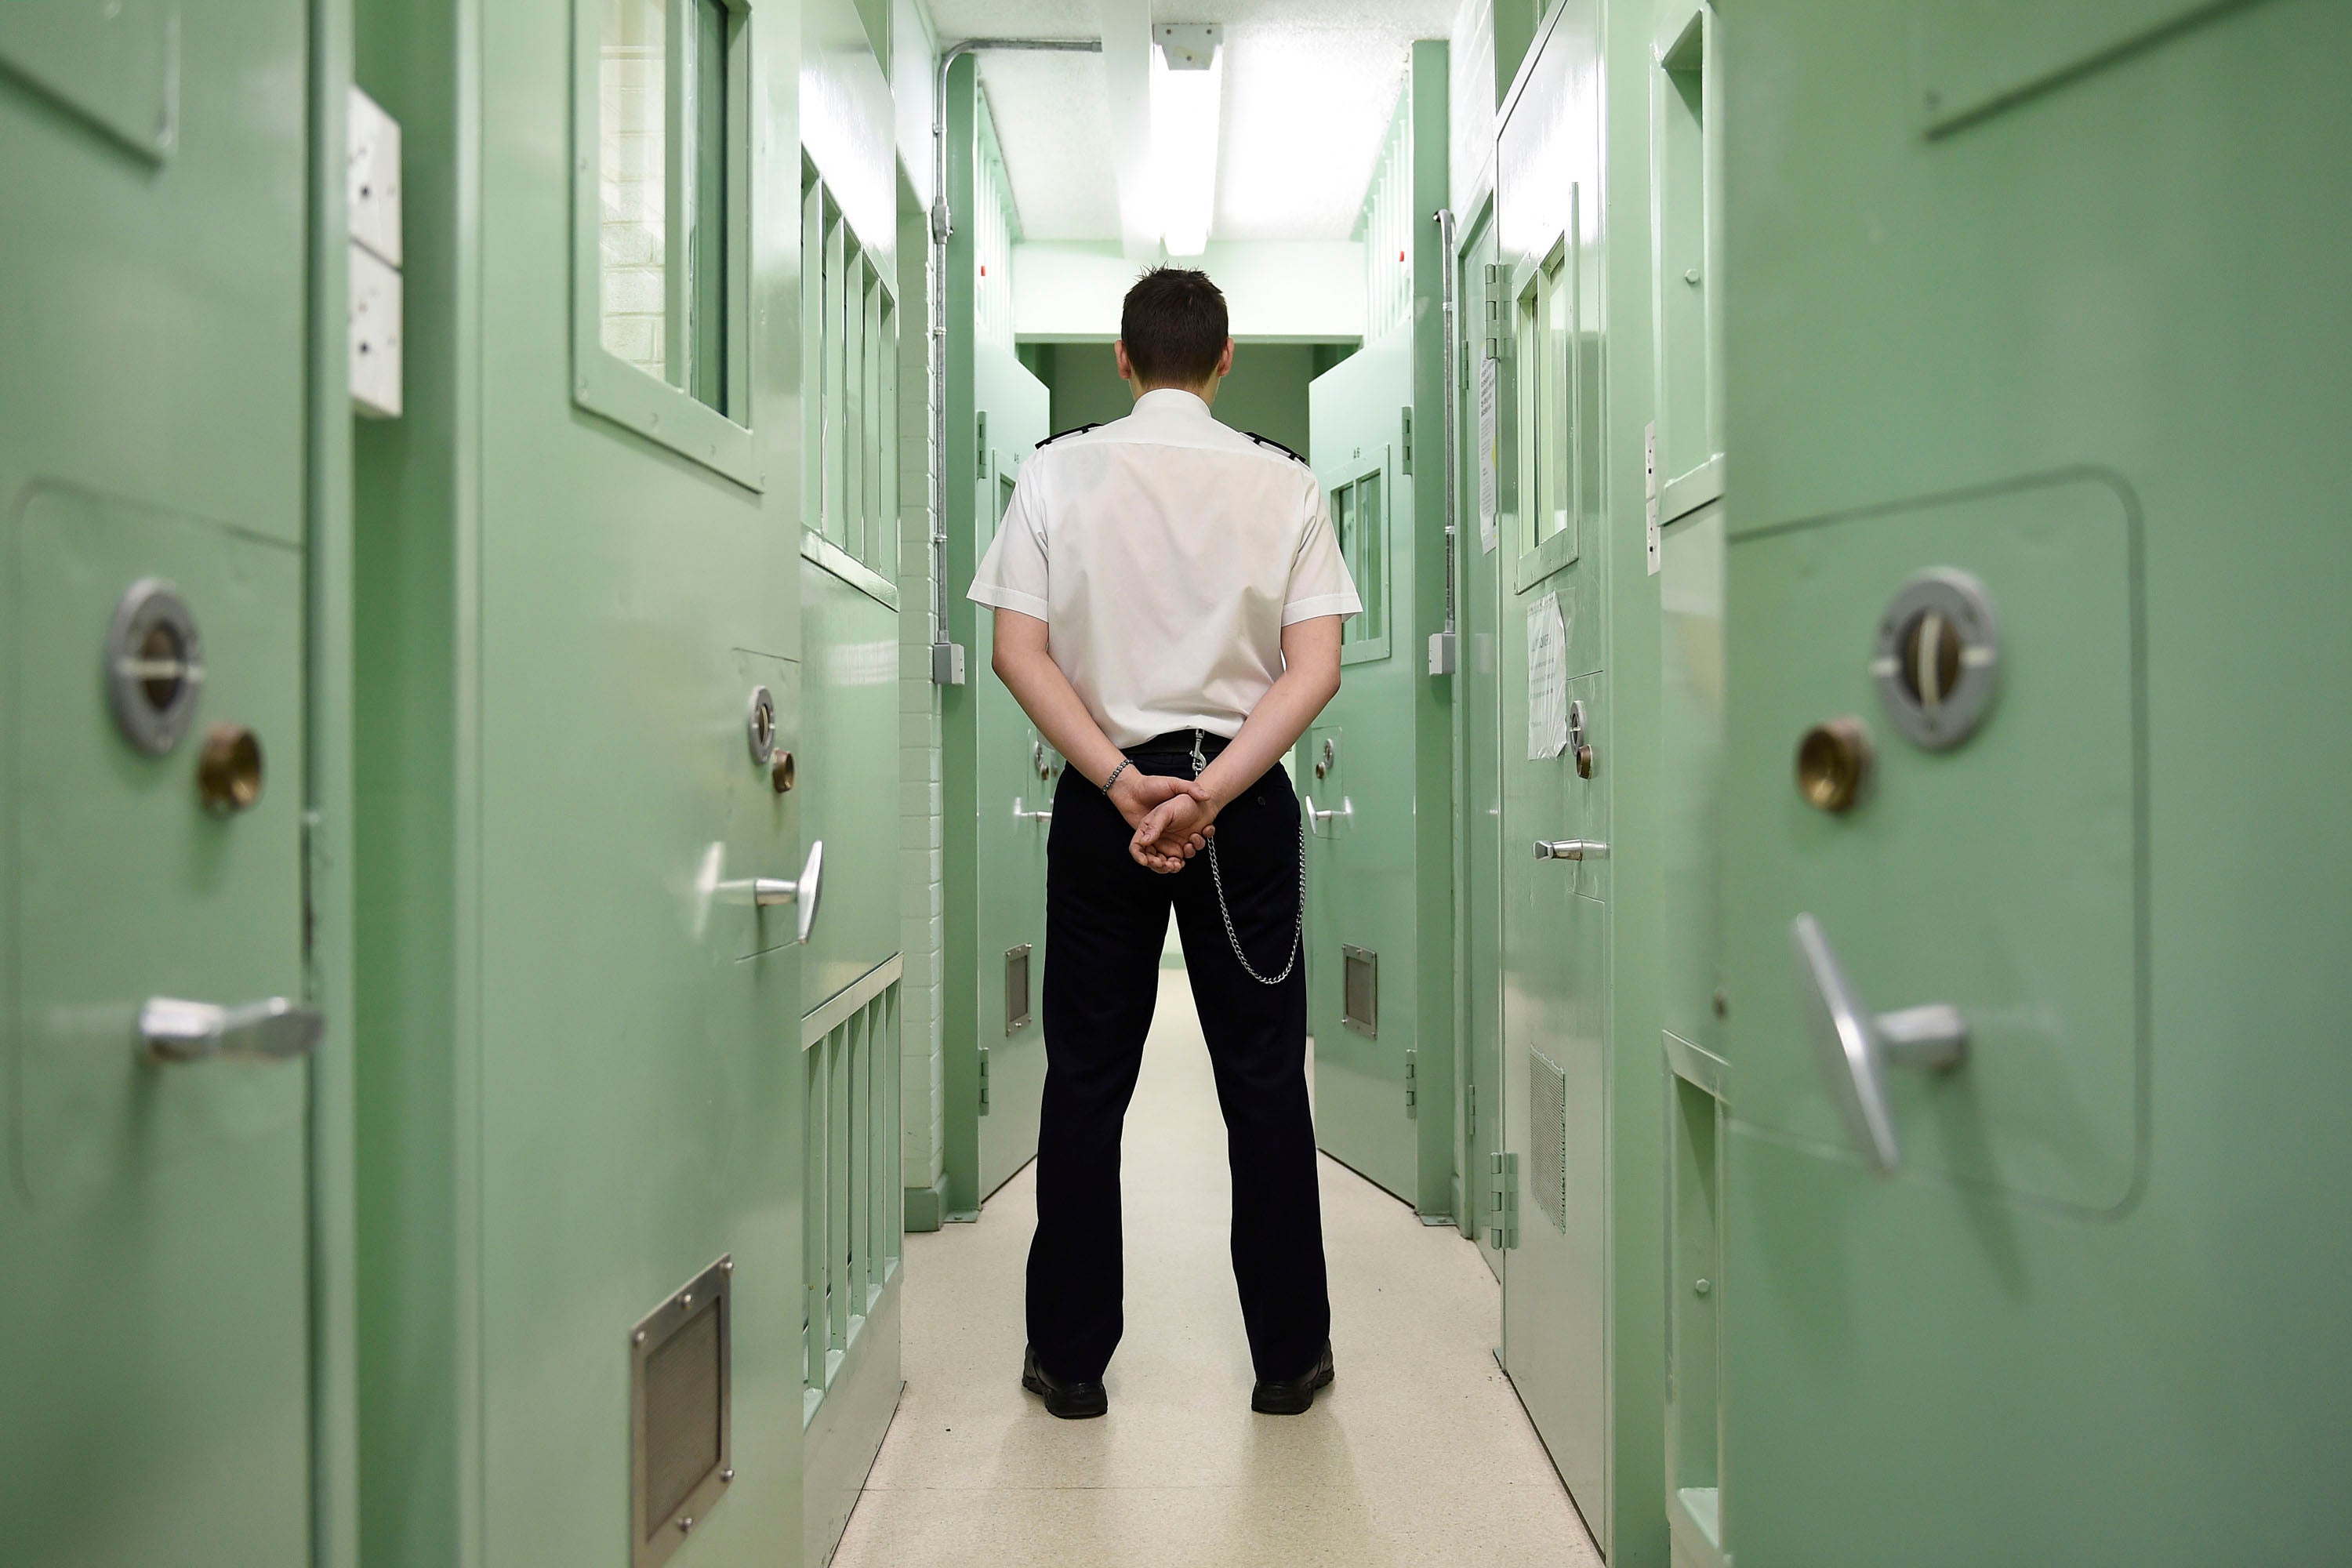 Three-quarters of prison staff said they had suffered recent abuse or assaults by inmates